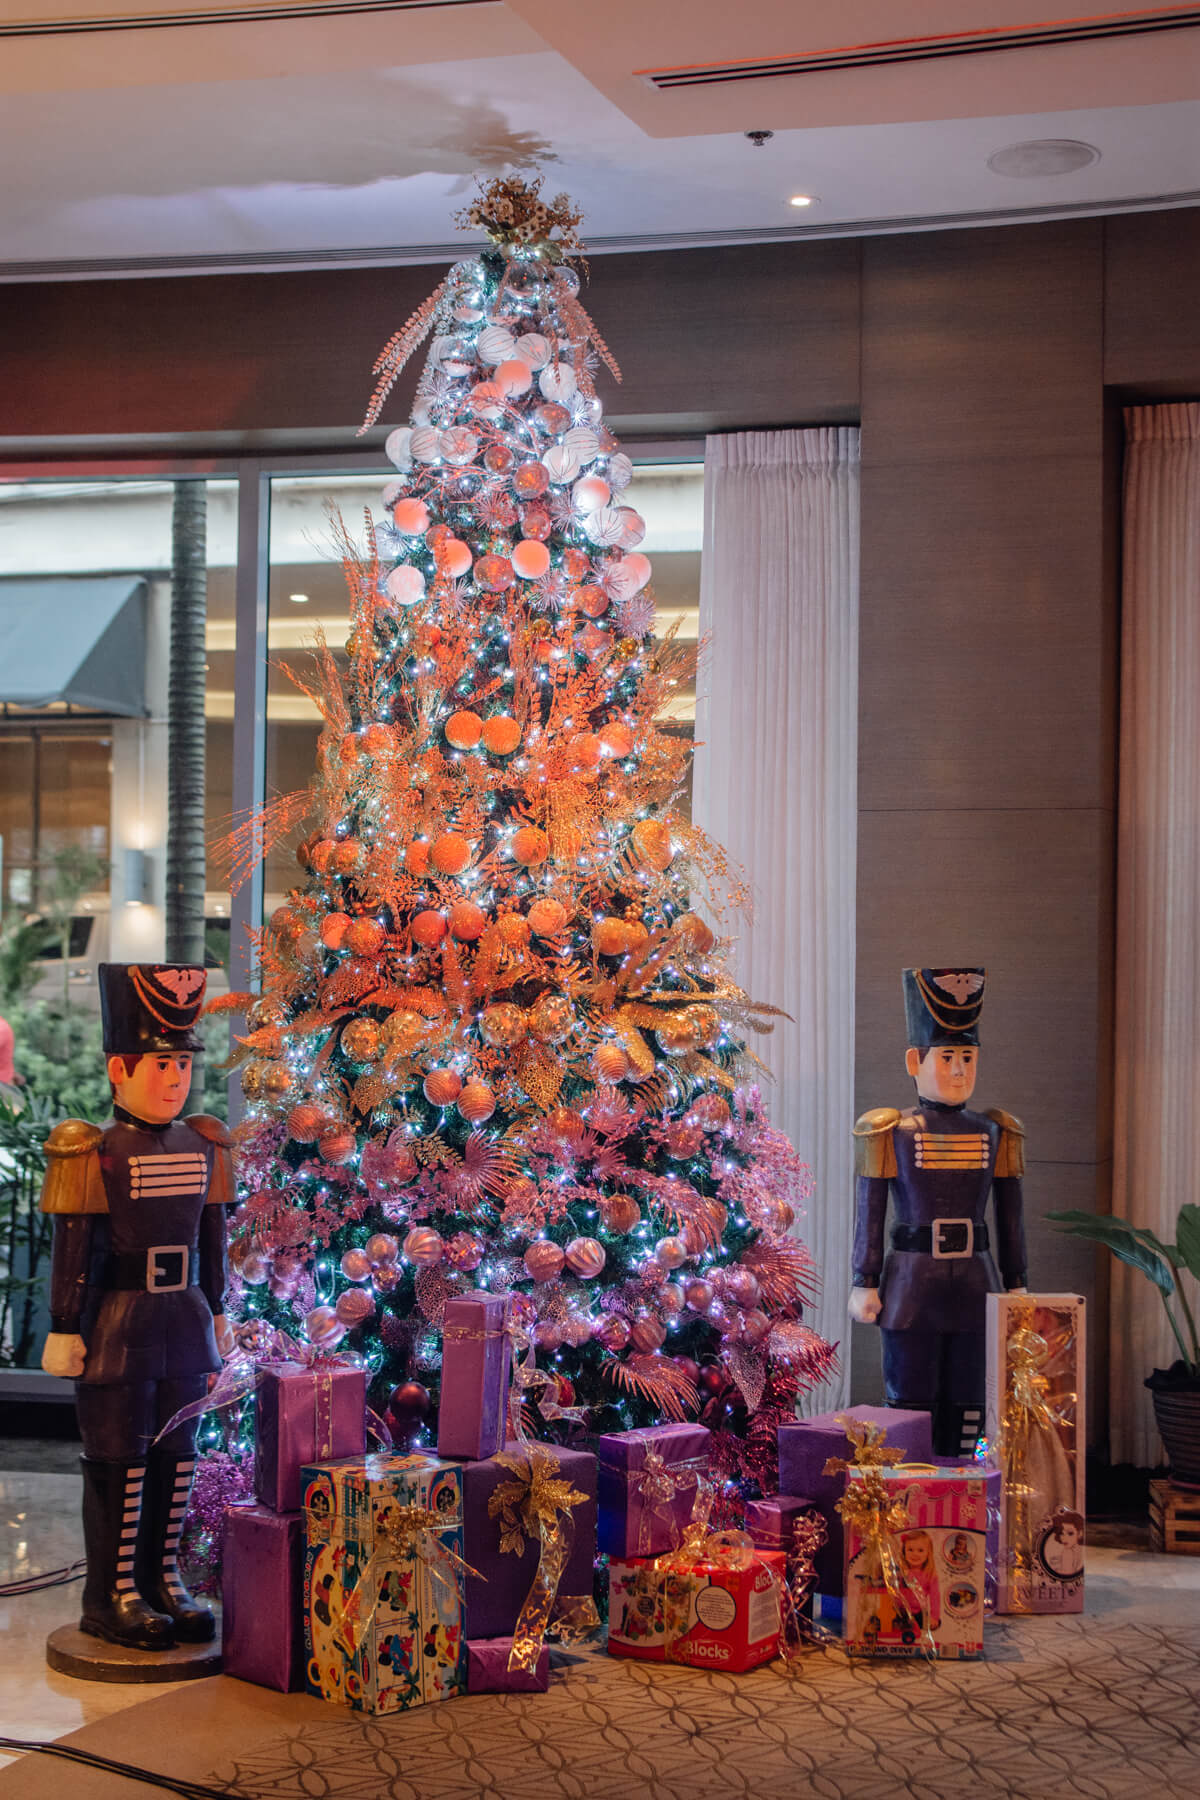 Quest Hotel & Conference Center Cebu unveils The Dazzling Days of Christmas